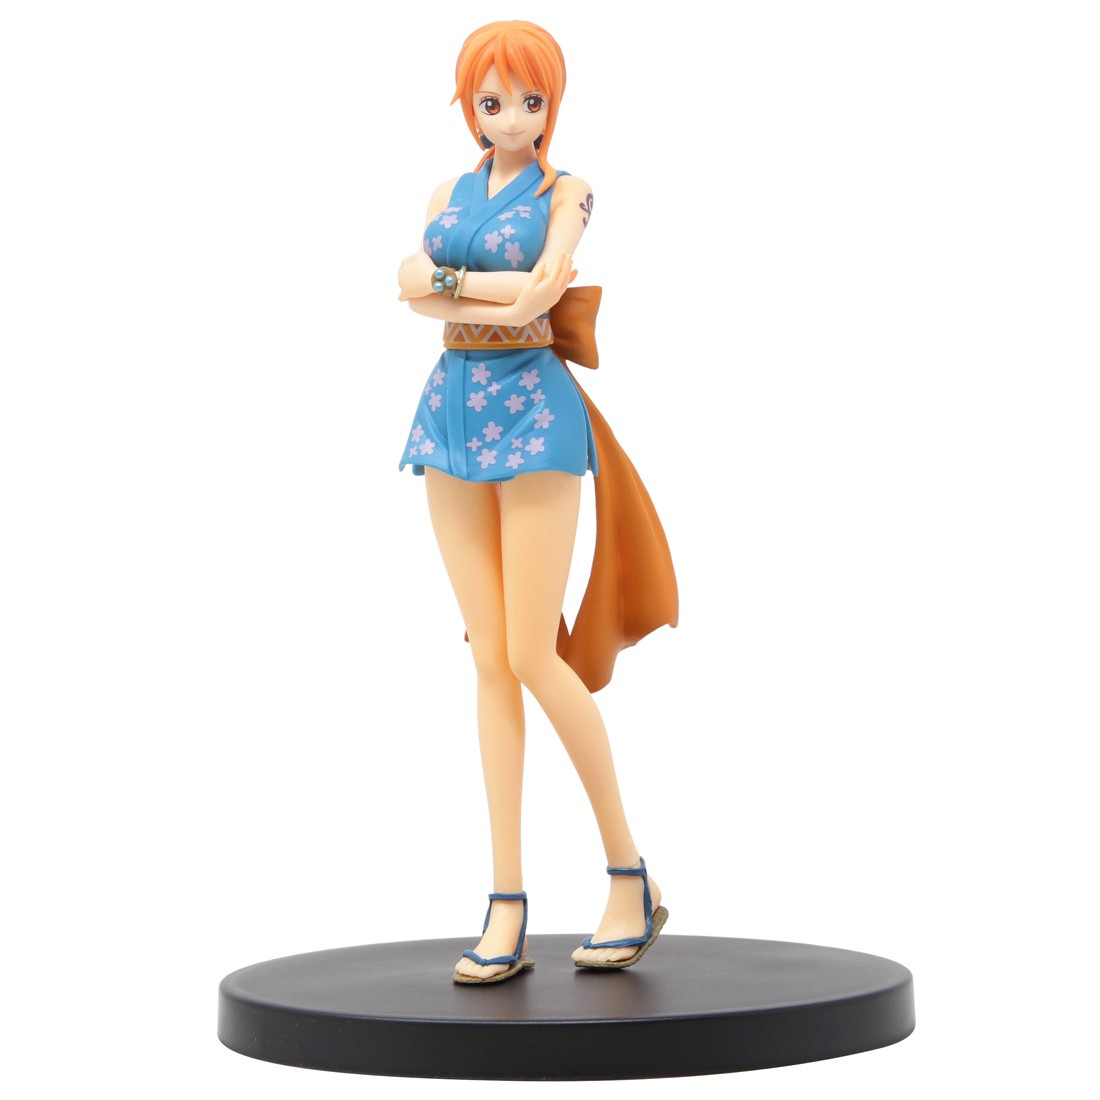 PVC Statue Character Model Toy Gifts One Piece Figure Nami Wano Country Figure Anime Figure Action Figure 2 Colours Color : Blue Color : Dark Blue